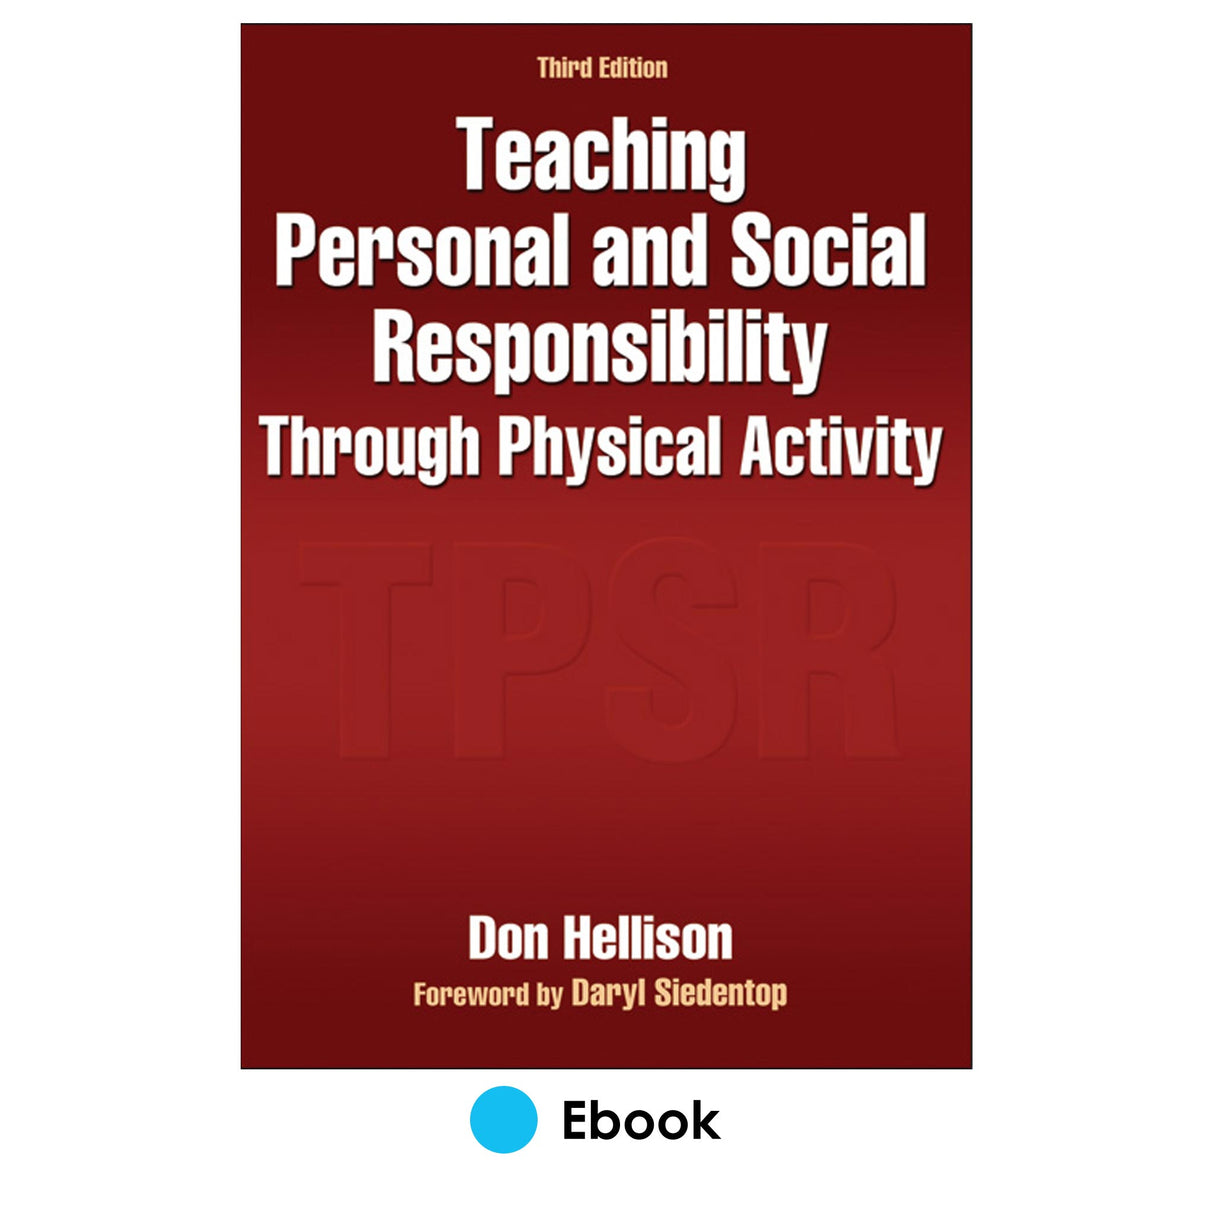 Teaching Personal and Social Responsibility Through Physical Activity 3rd Edition PDF